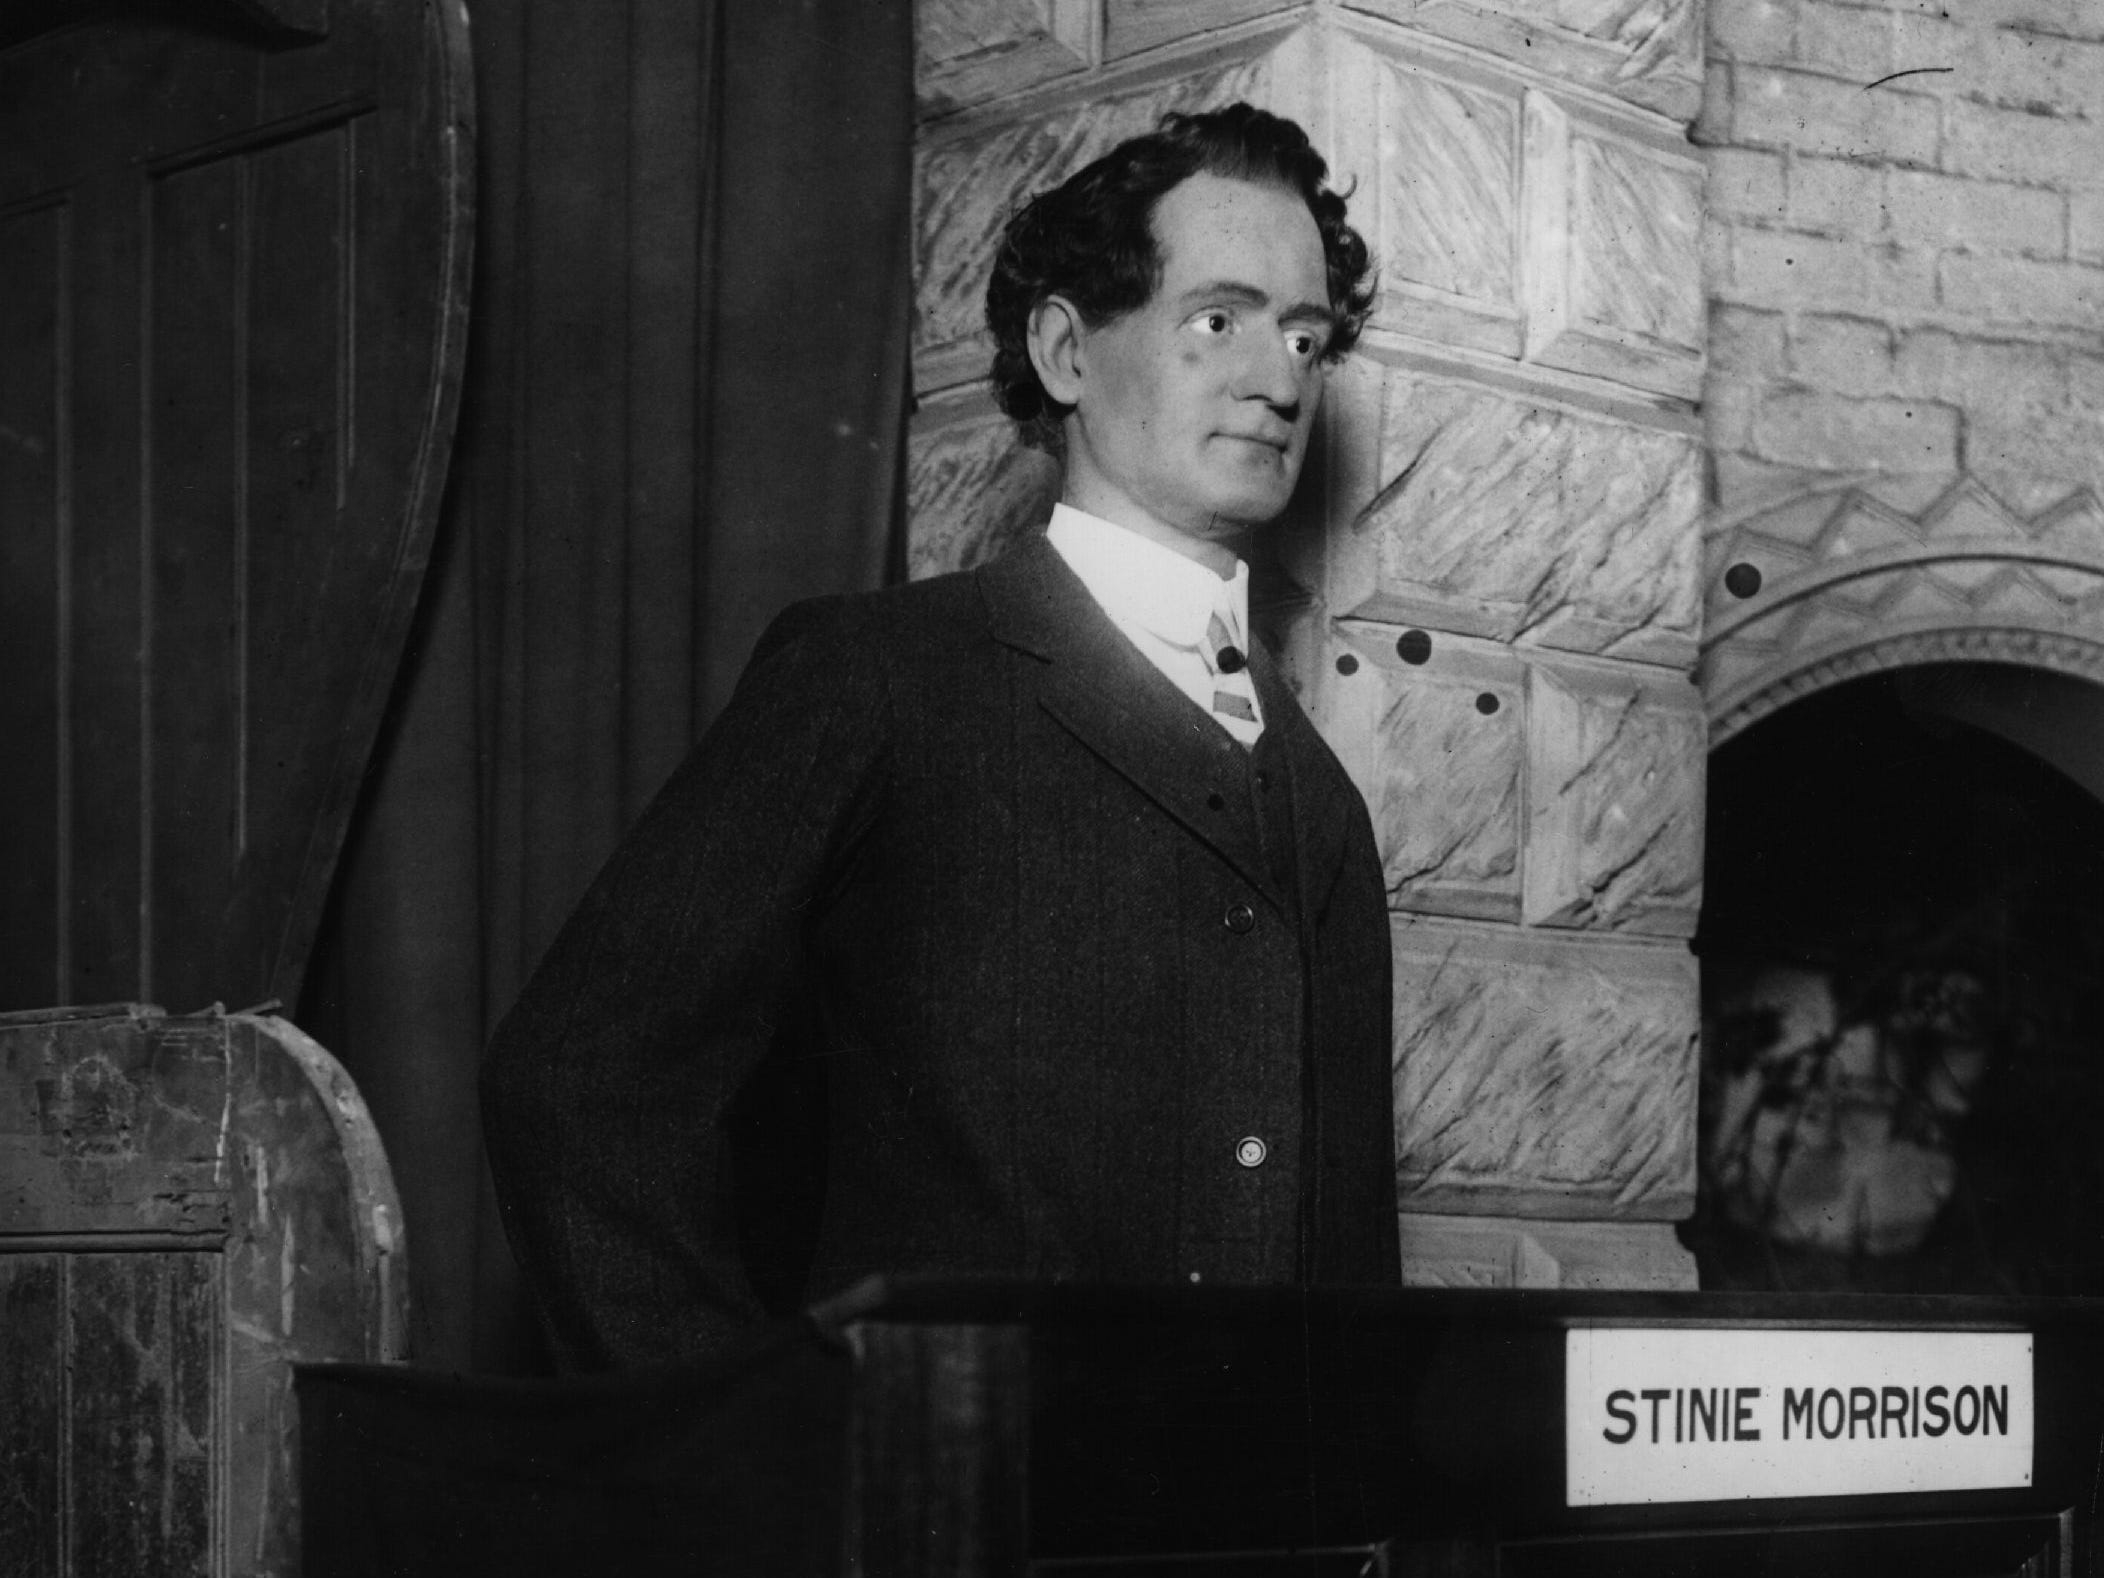 24th April 1911: A waxwork model of Steinie Morrison (or Stinie Morrison, or Morris Stein) in Madame Tussaud&#39;s Chamber of Horrors. Morrison was convicted for the murder of Leon Beron, whose body was found on Clapham Common with the letter &#39;S&#39; slashed on each side of his face. Morrison was later reprieved, but died from a hunger strike in Parkhurst Prison, still protesting his innocence.